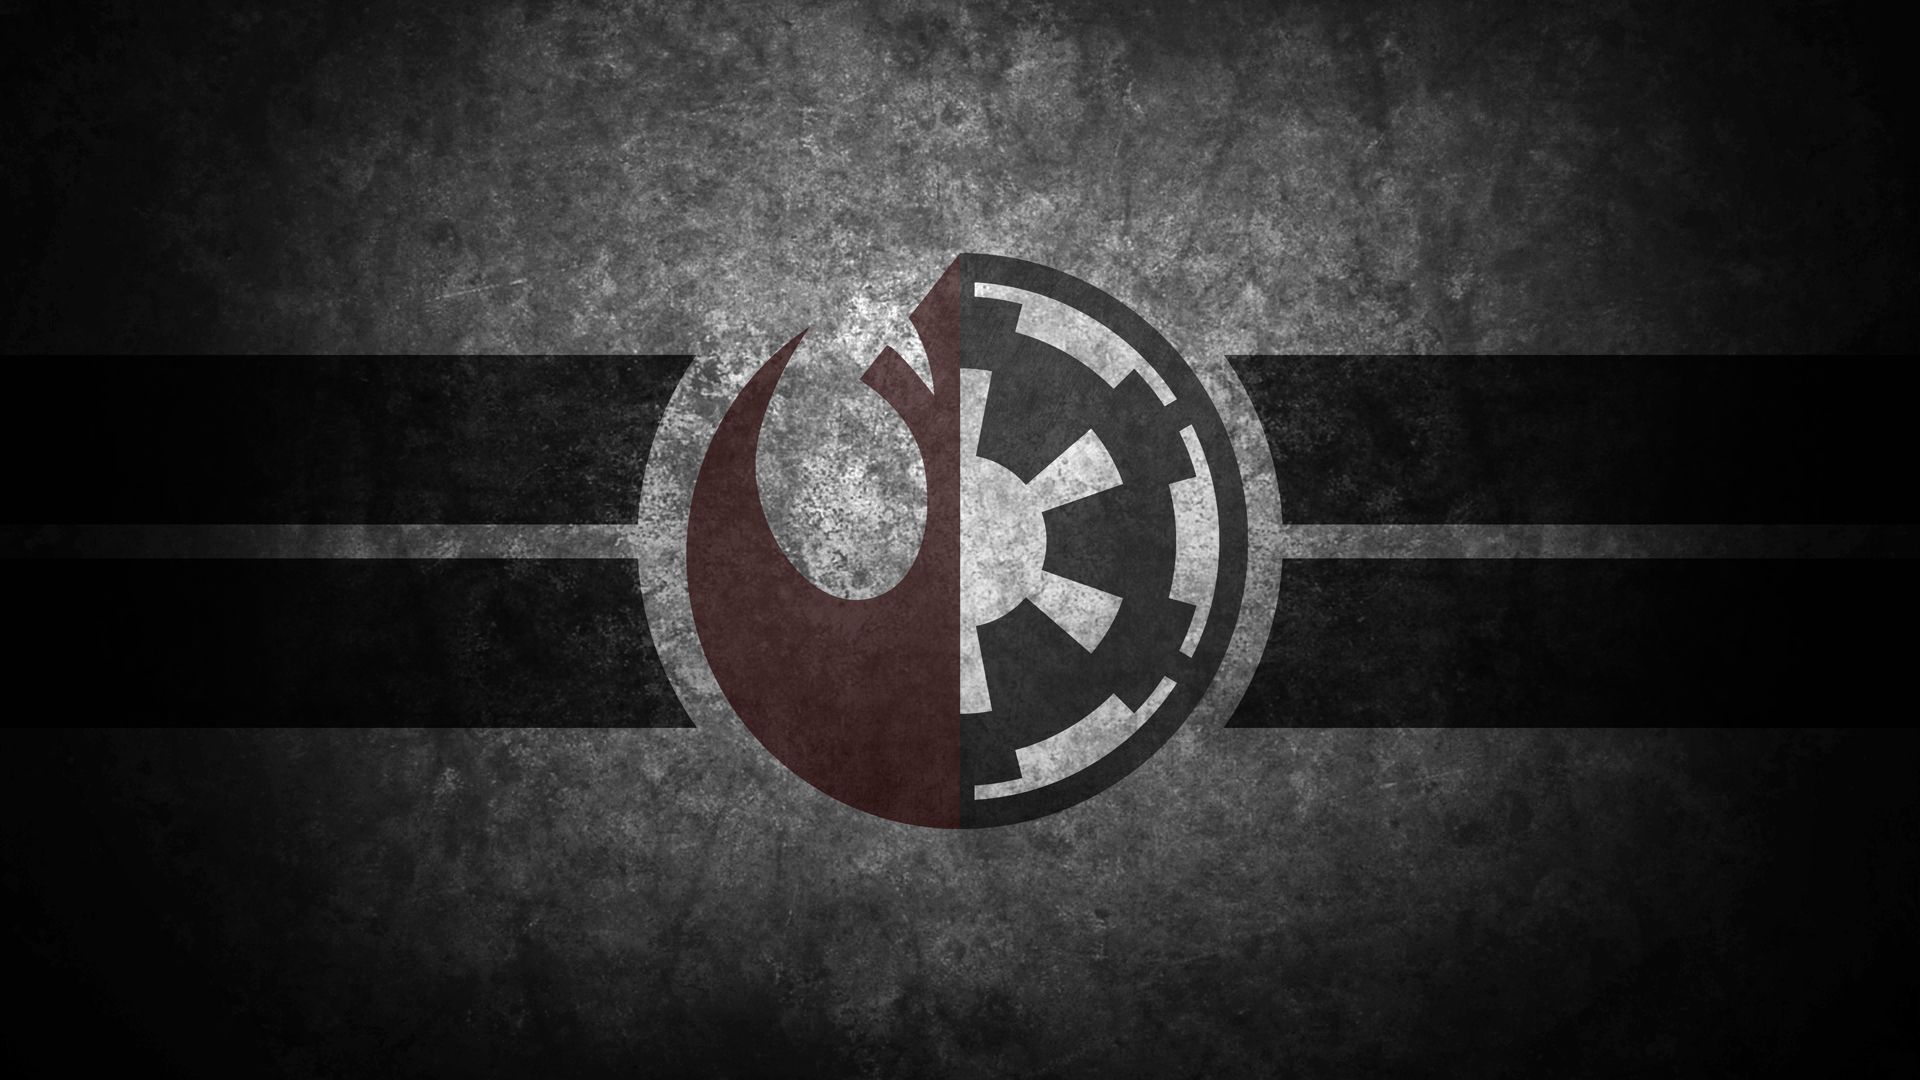 Star Wars Empire Wallpaper High Quality Free Download. Star wars